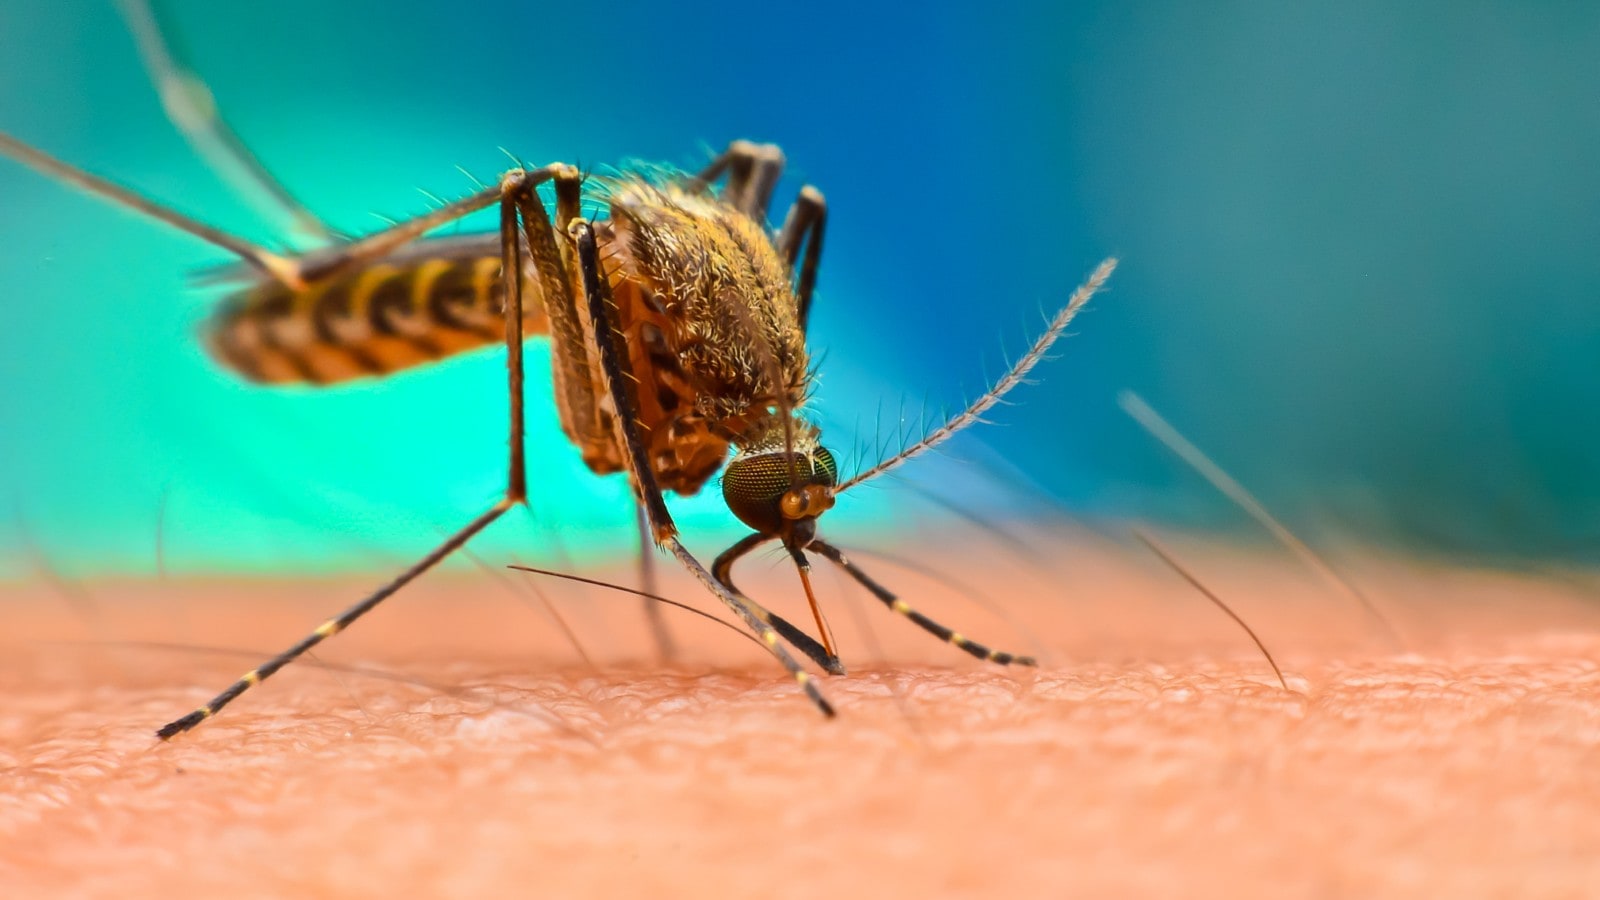 Common dengue myths you should be aware of